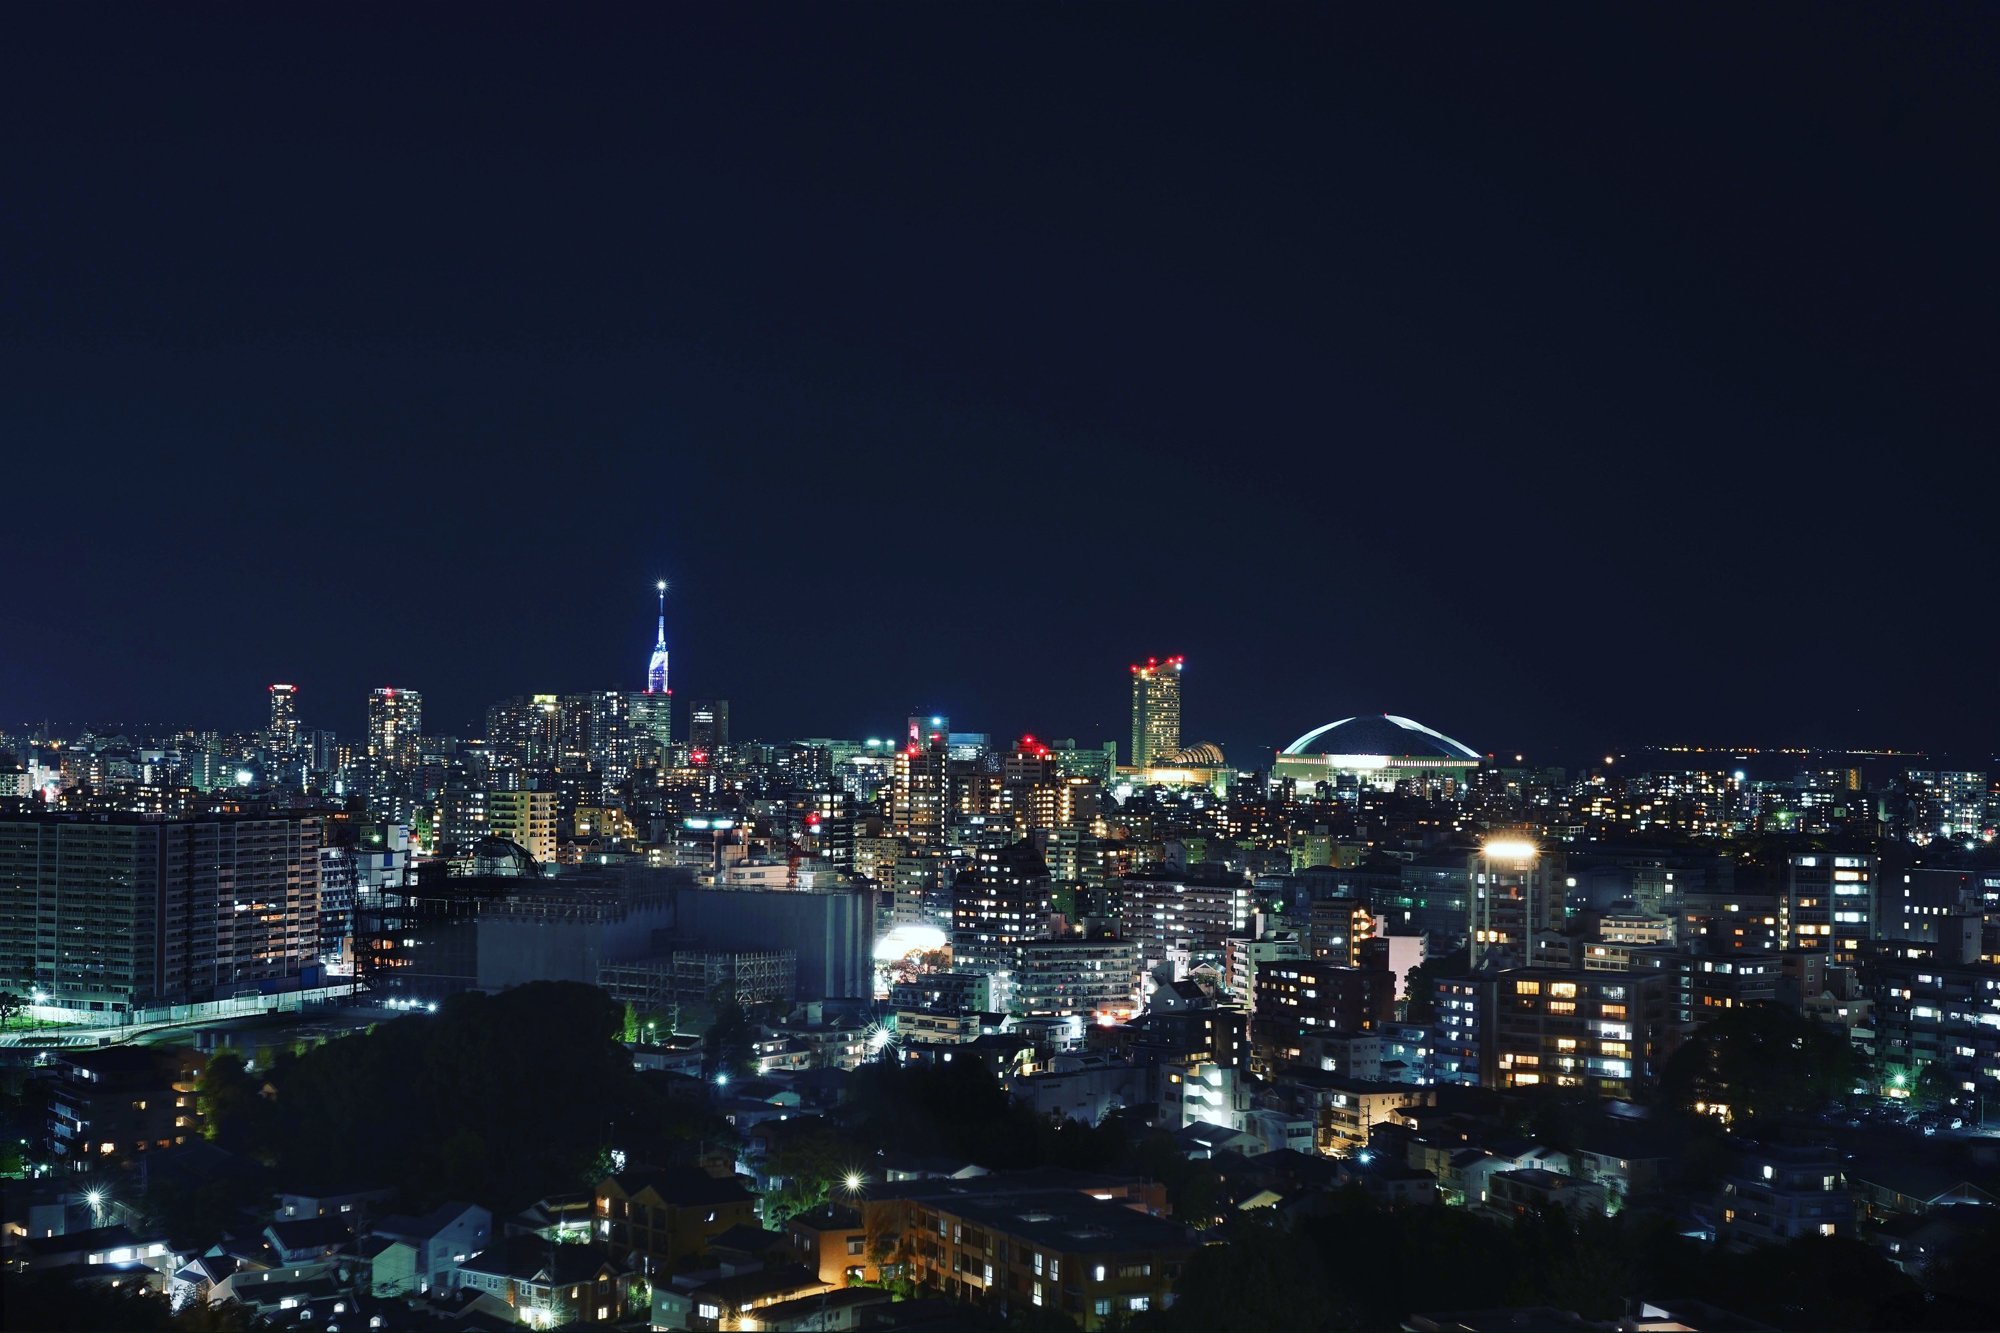 Boomtown: The city at night, with Fukuoka Tower, the city's tallest building, and Fukuoka Dome lit up. | OSCAR BOYD